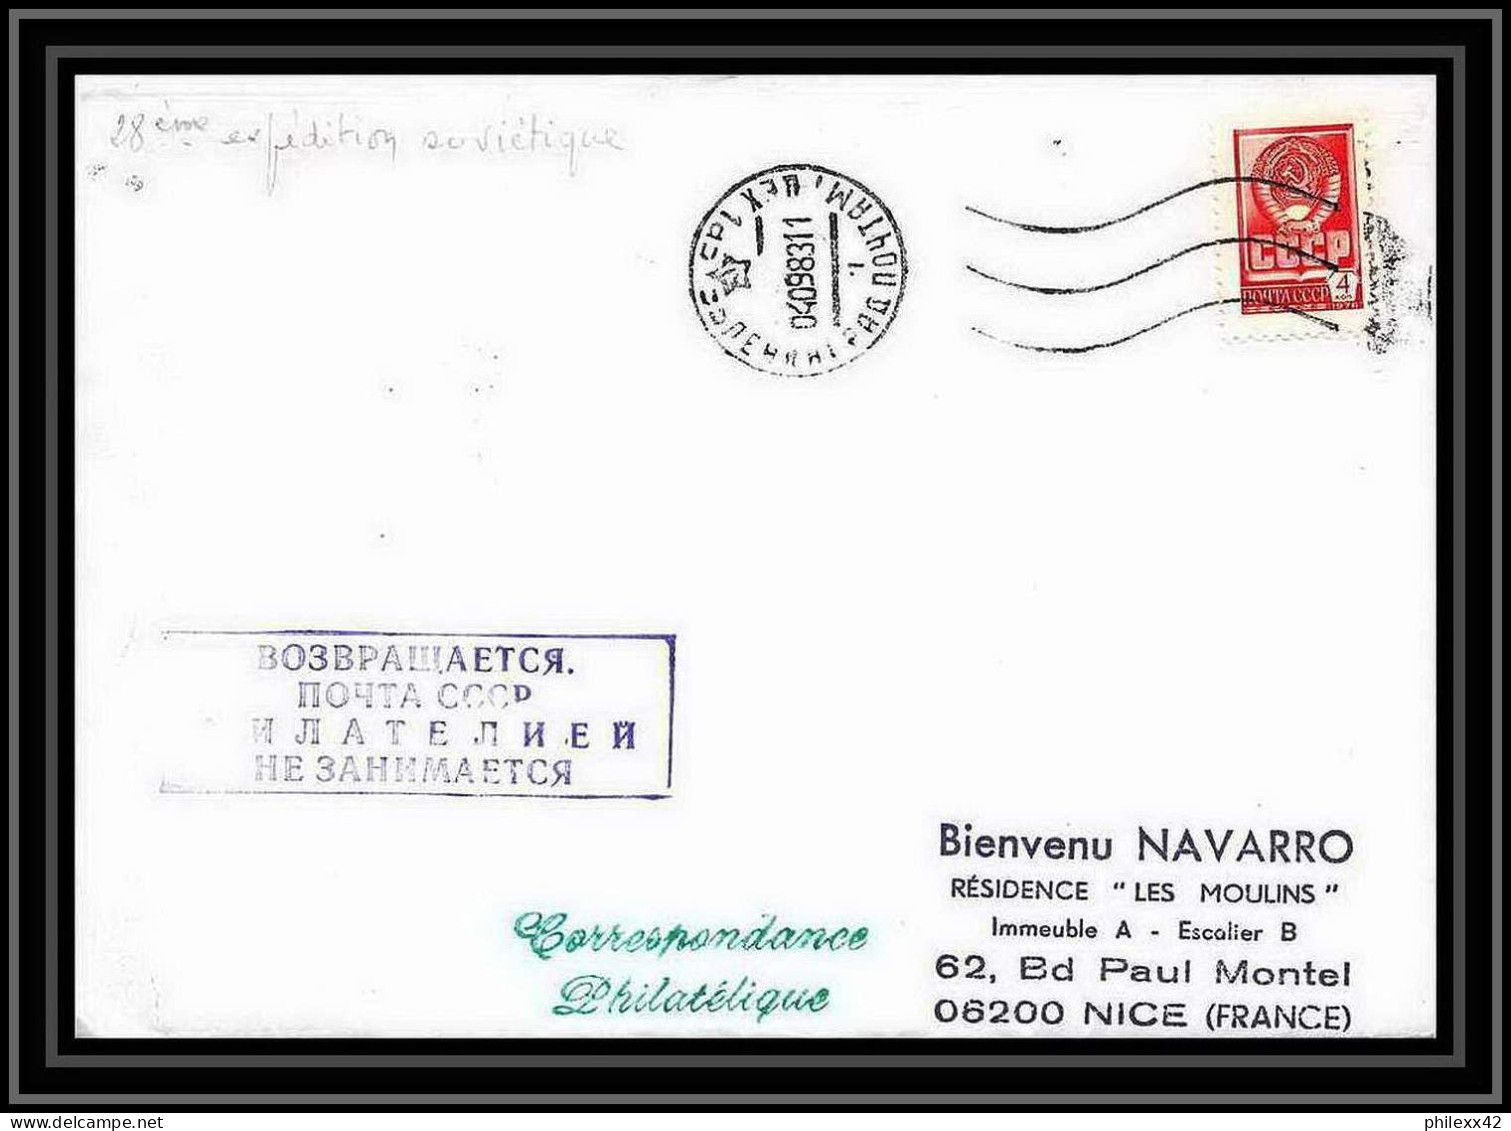 2037 Antarctic Russie (Russia Urss USSR) Lettre (cover) 28 ème Expedition Sovietique 04/09/1983 - Research Stations